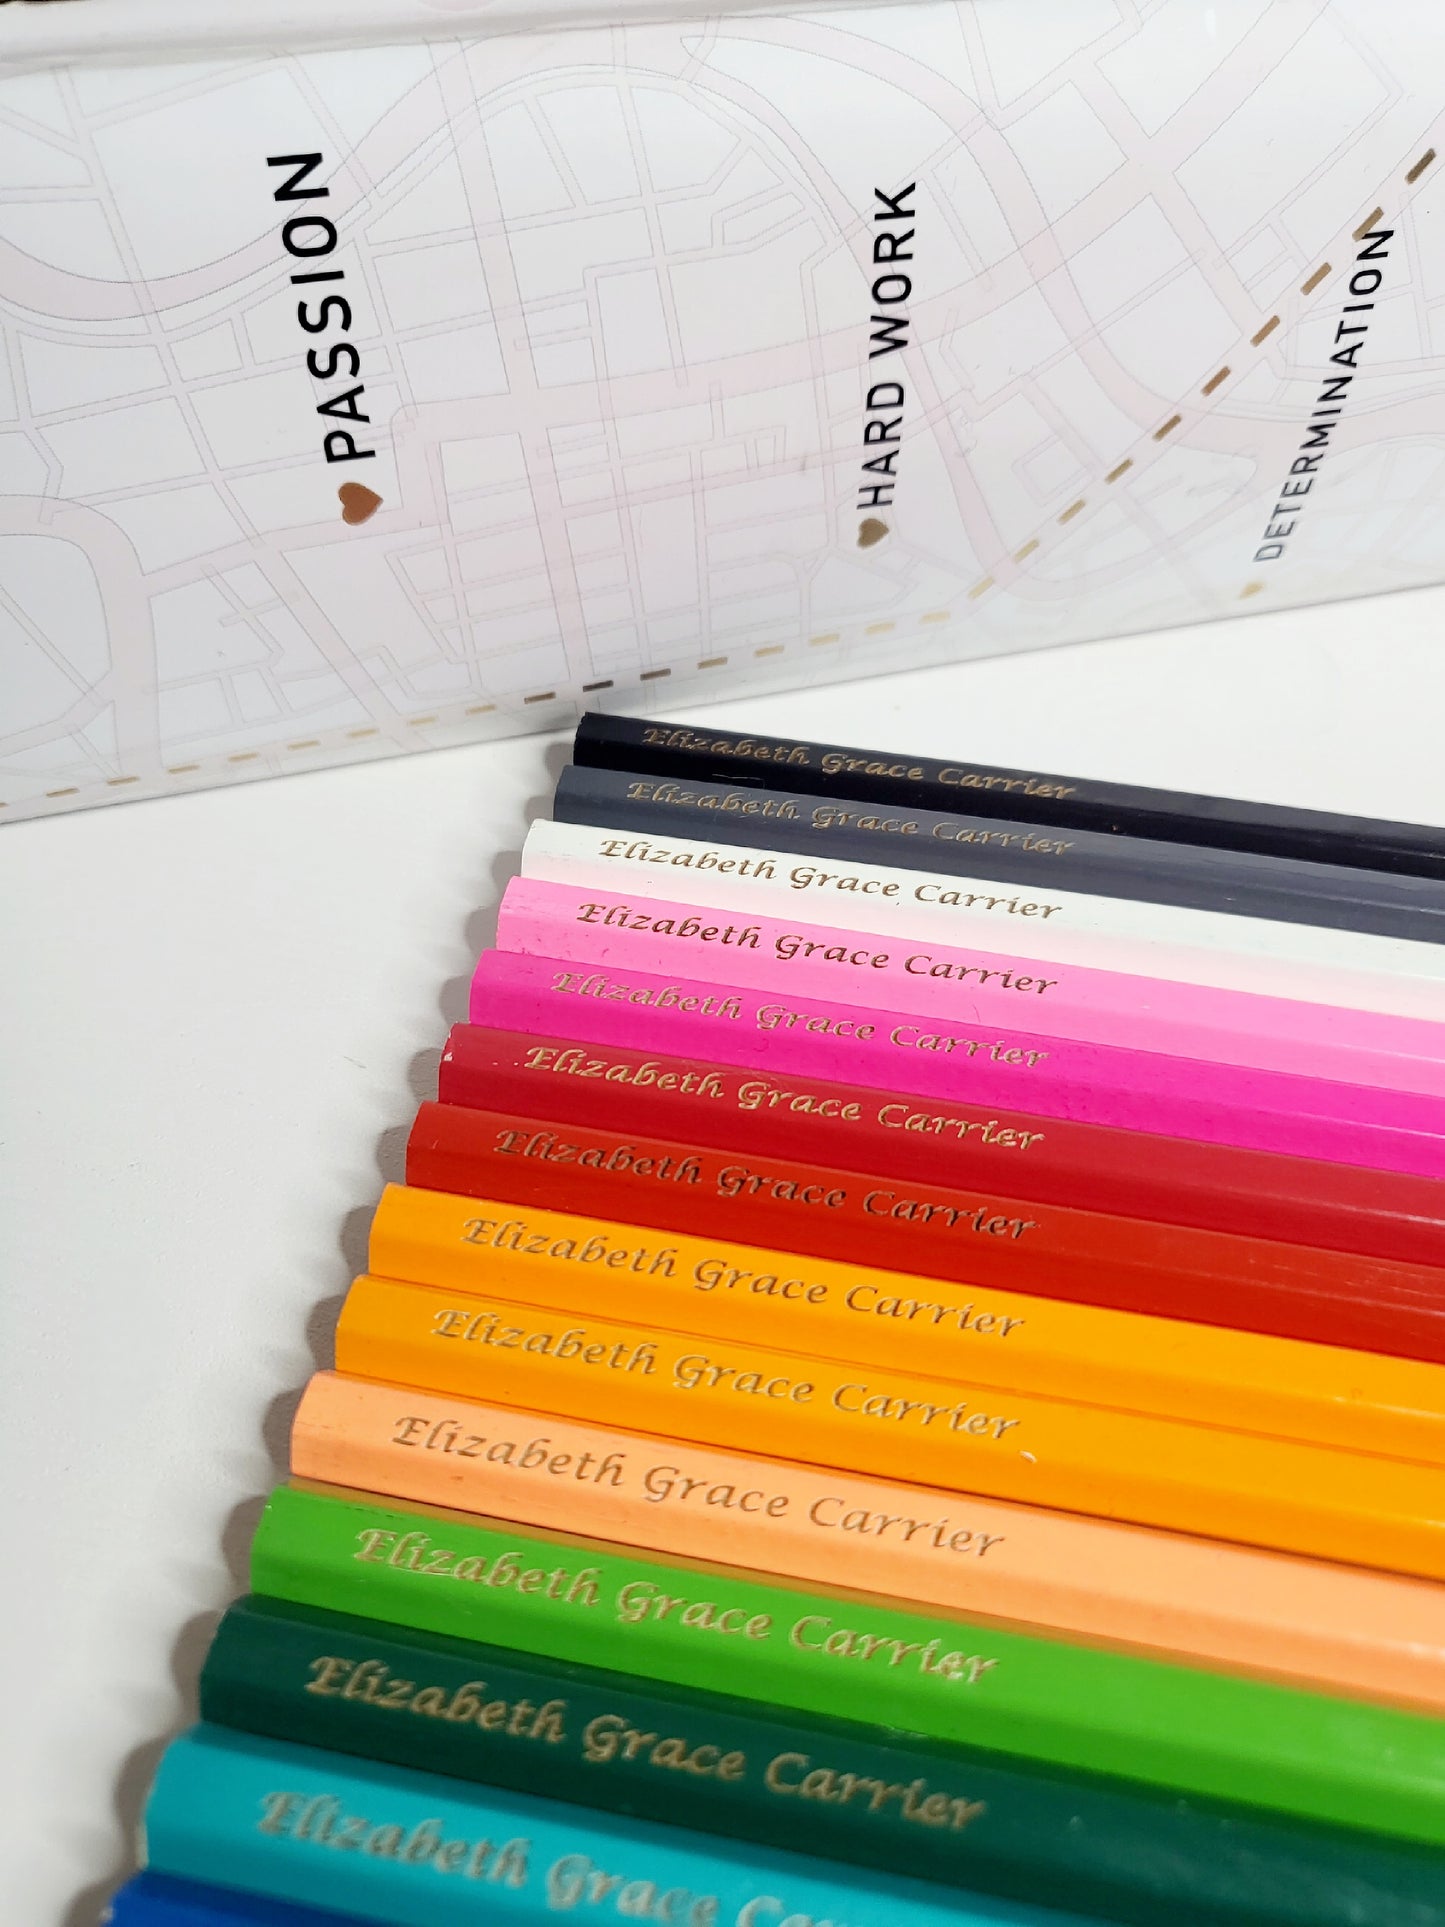 20 Personalised Colouring Pencils